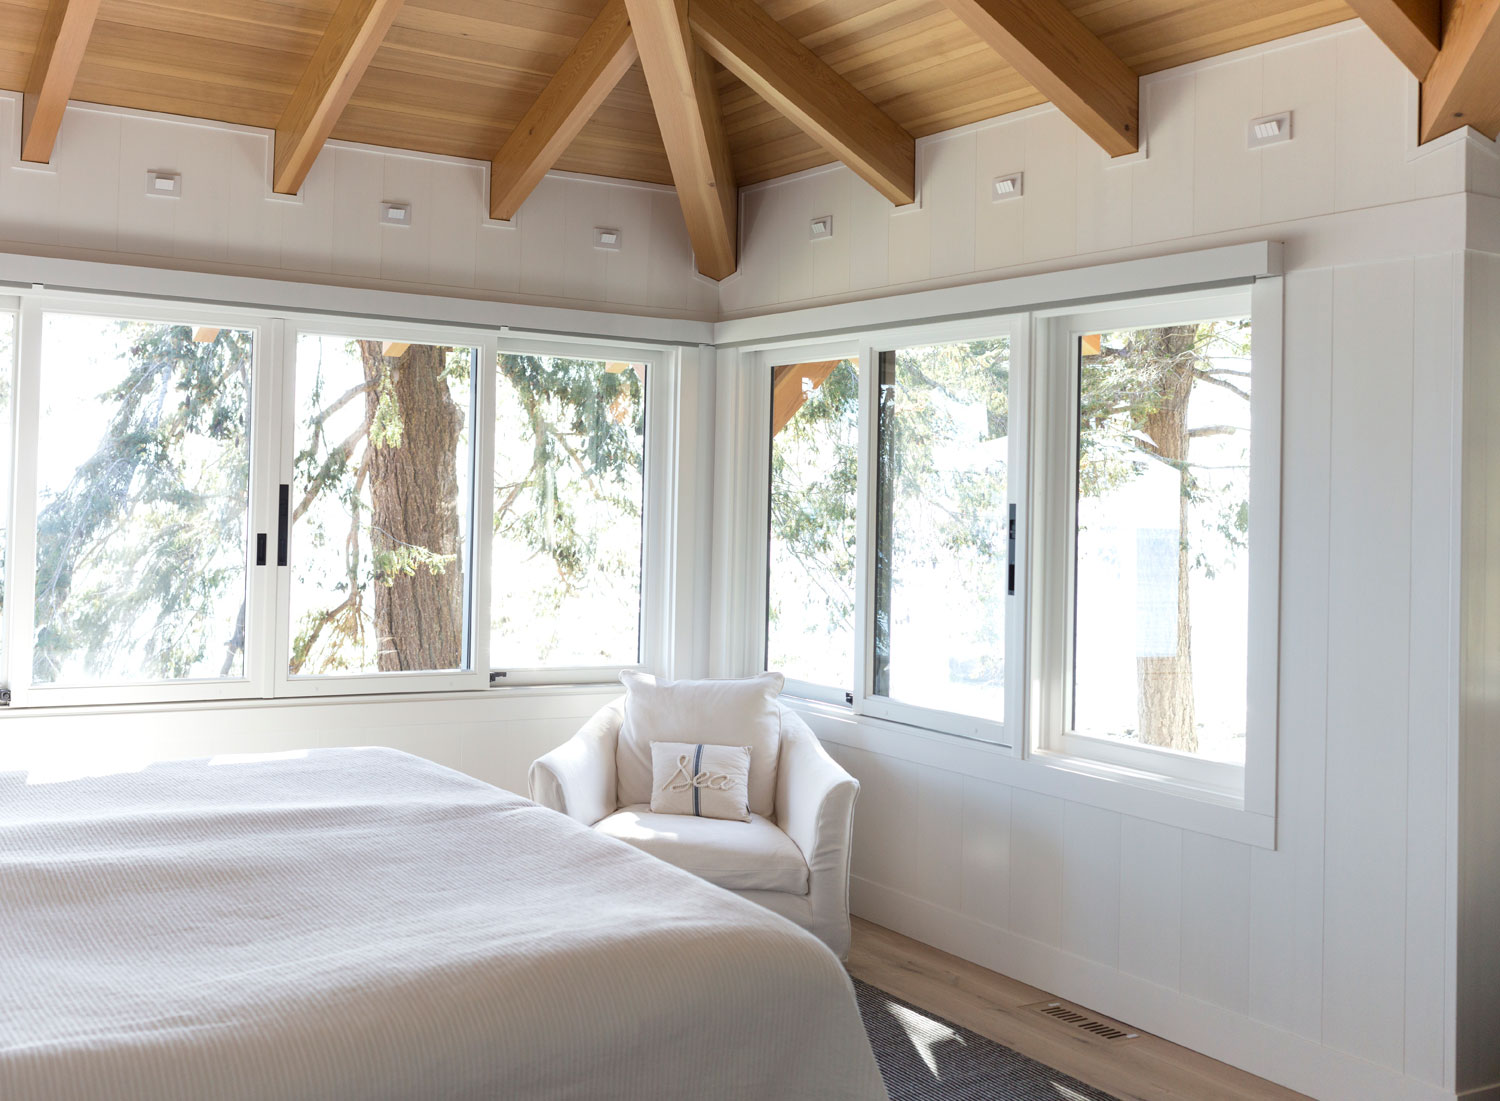 white wooden bedroom walls painted white with large windows